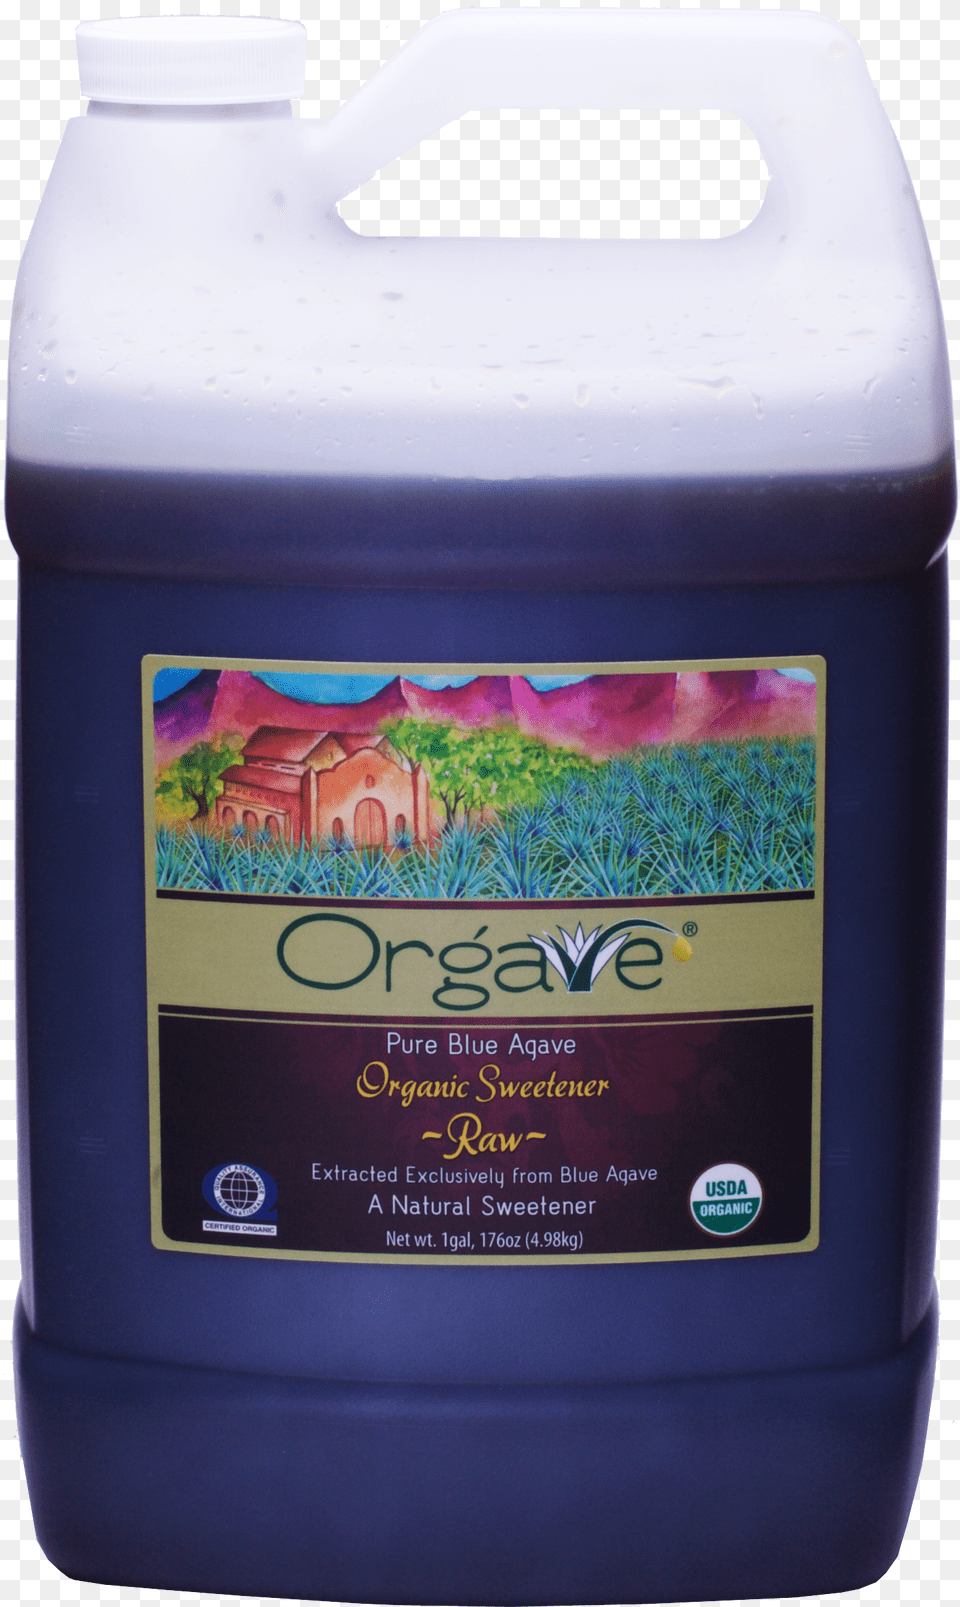 Orgave 100 Blue Agave Organic Syrup Bison Free Png Download